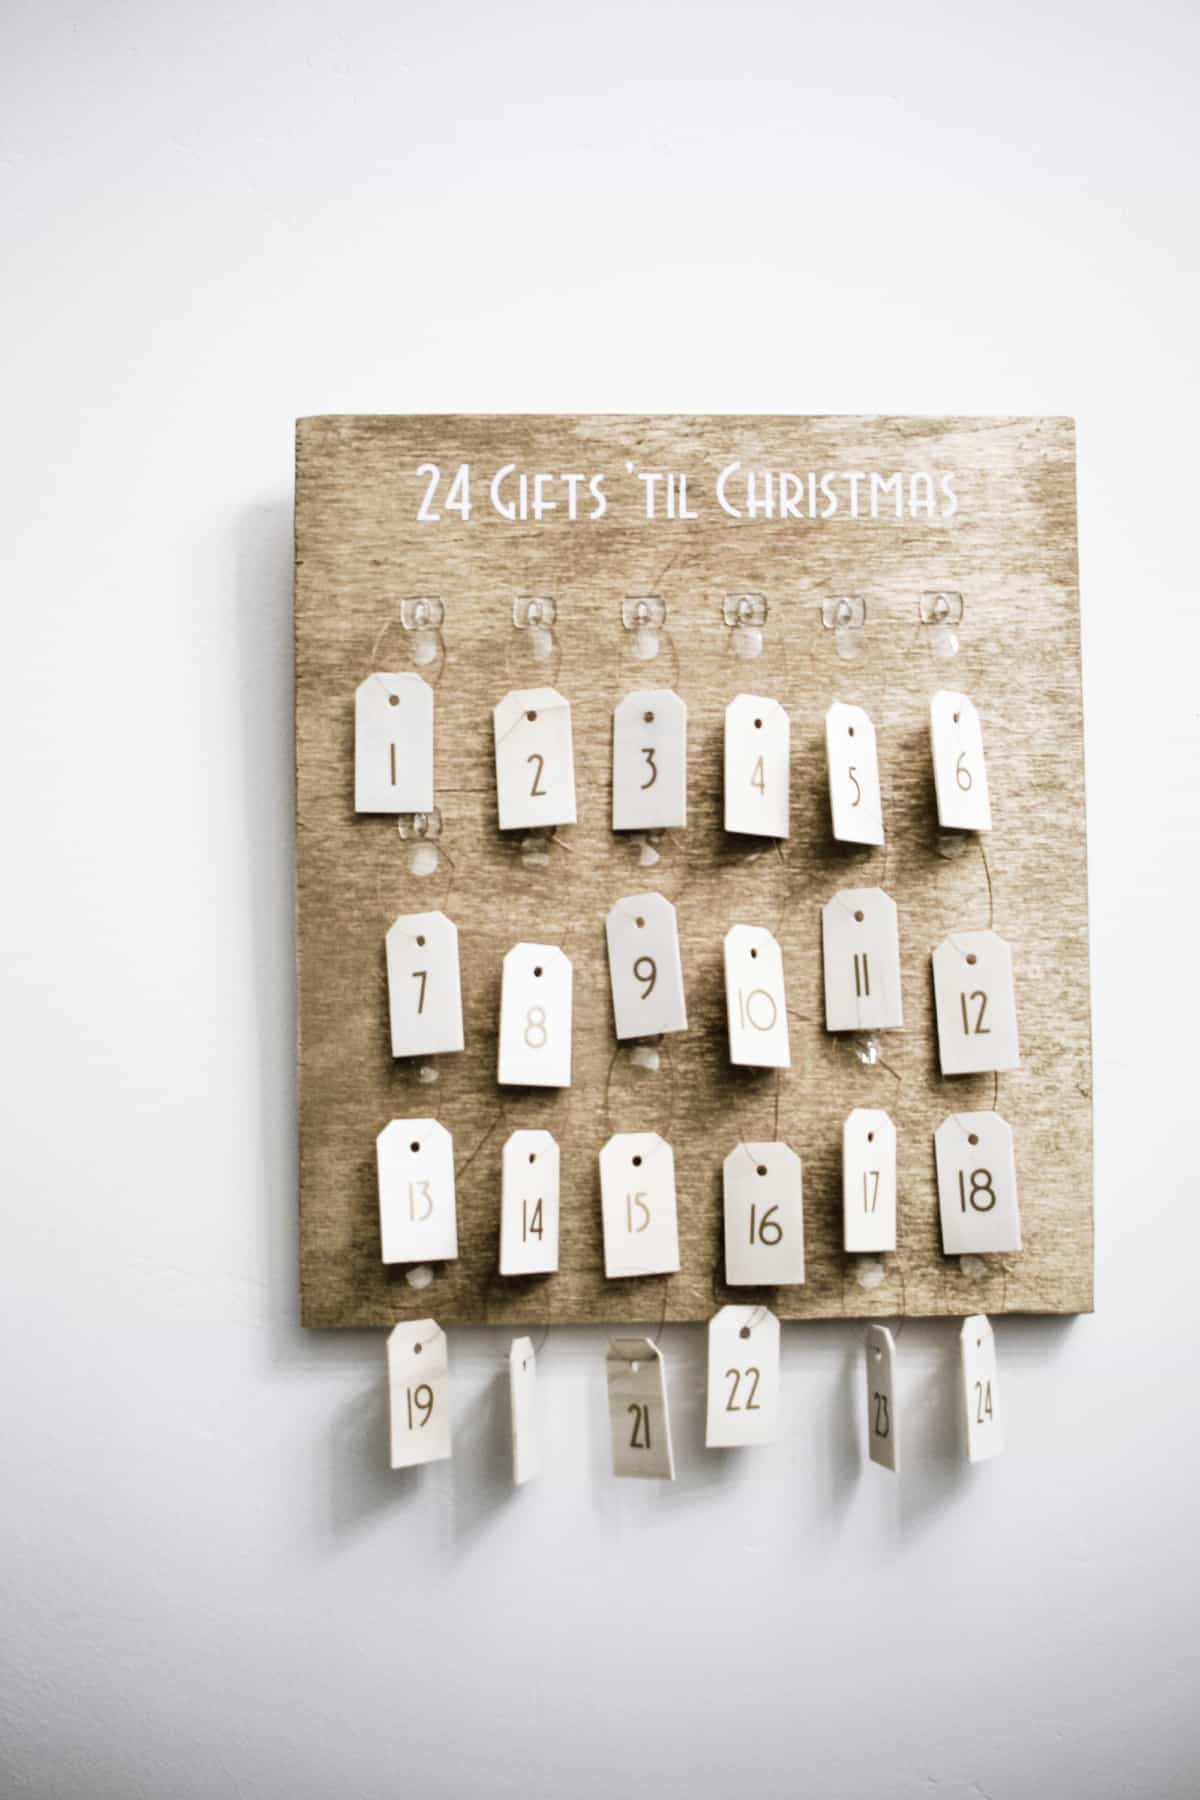 What better way to celebrate the coming holiday than 25 gifts of giving? The Christmas advent calendar will get you in the gift giving spirit #cricutmade #cricutholiday